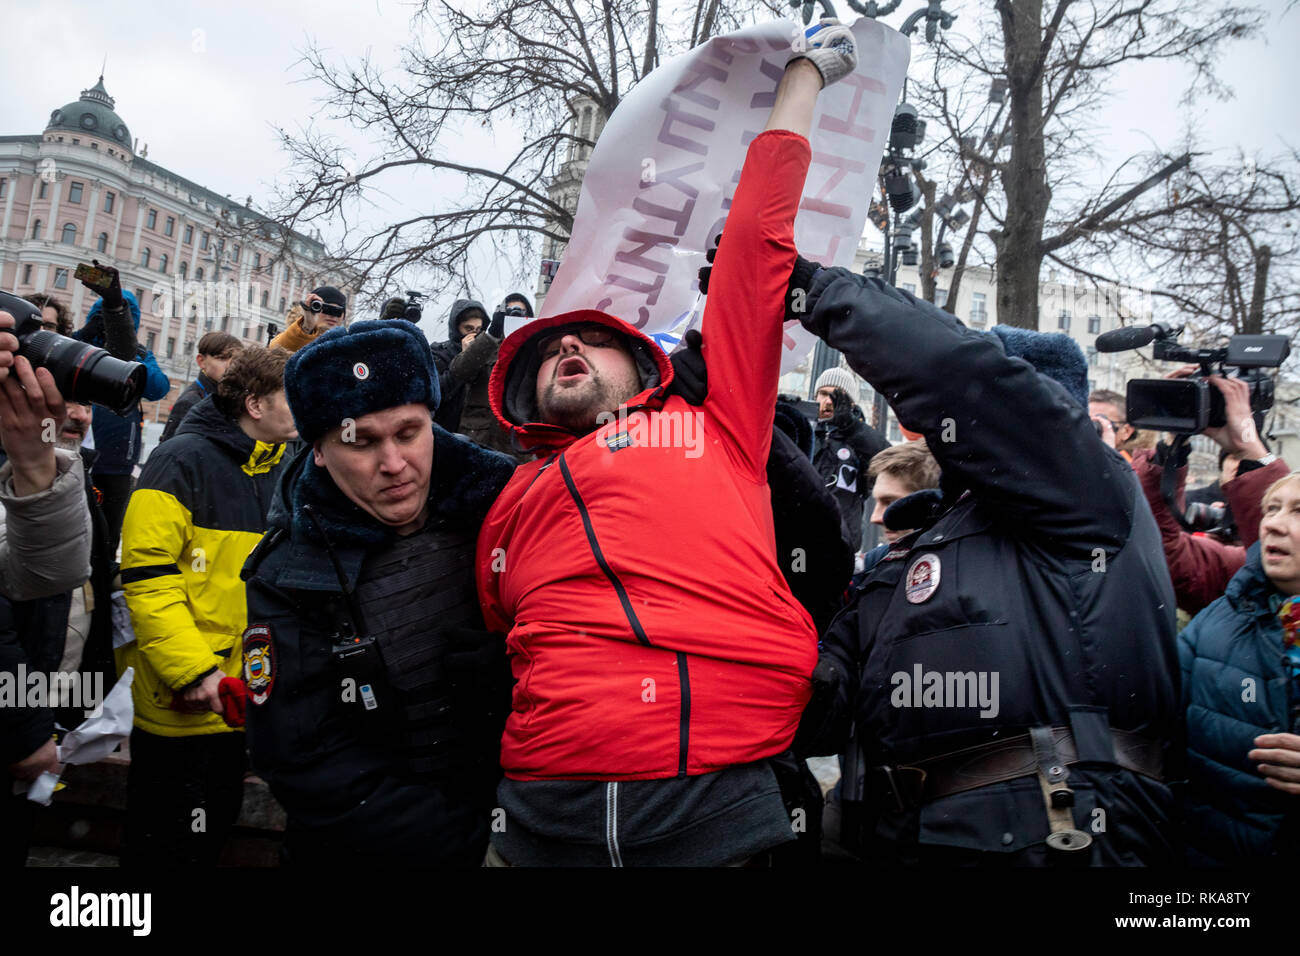 Moscow, Russia. 10 February, 2019: People take part in Mothers' Anger March, an event in support of political prisoners, in Tverskoy Boulevard of Moscow. Police officers detain a protester during a rally to demand freedom for political prisoners Credit: Nikolay Vinokurov/Alamy Live News Stock Photo